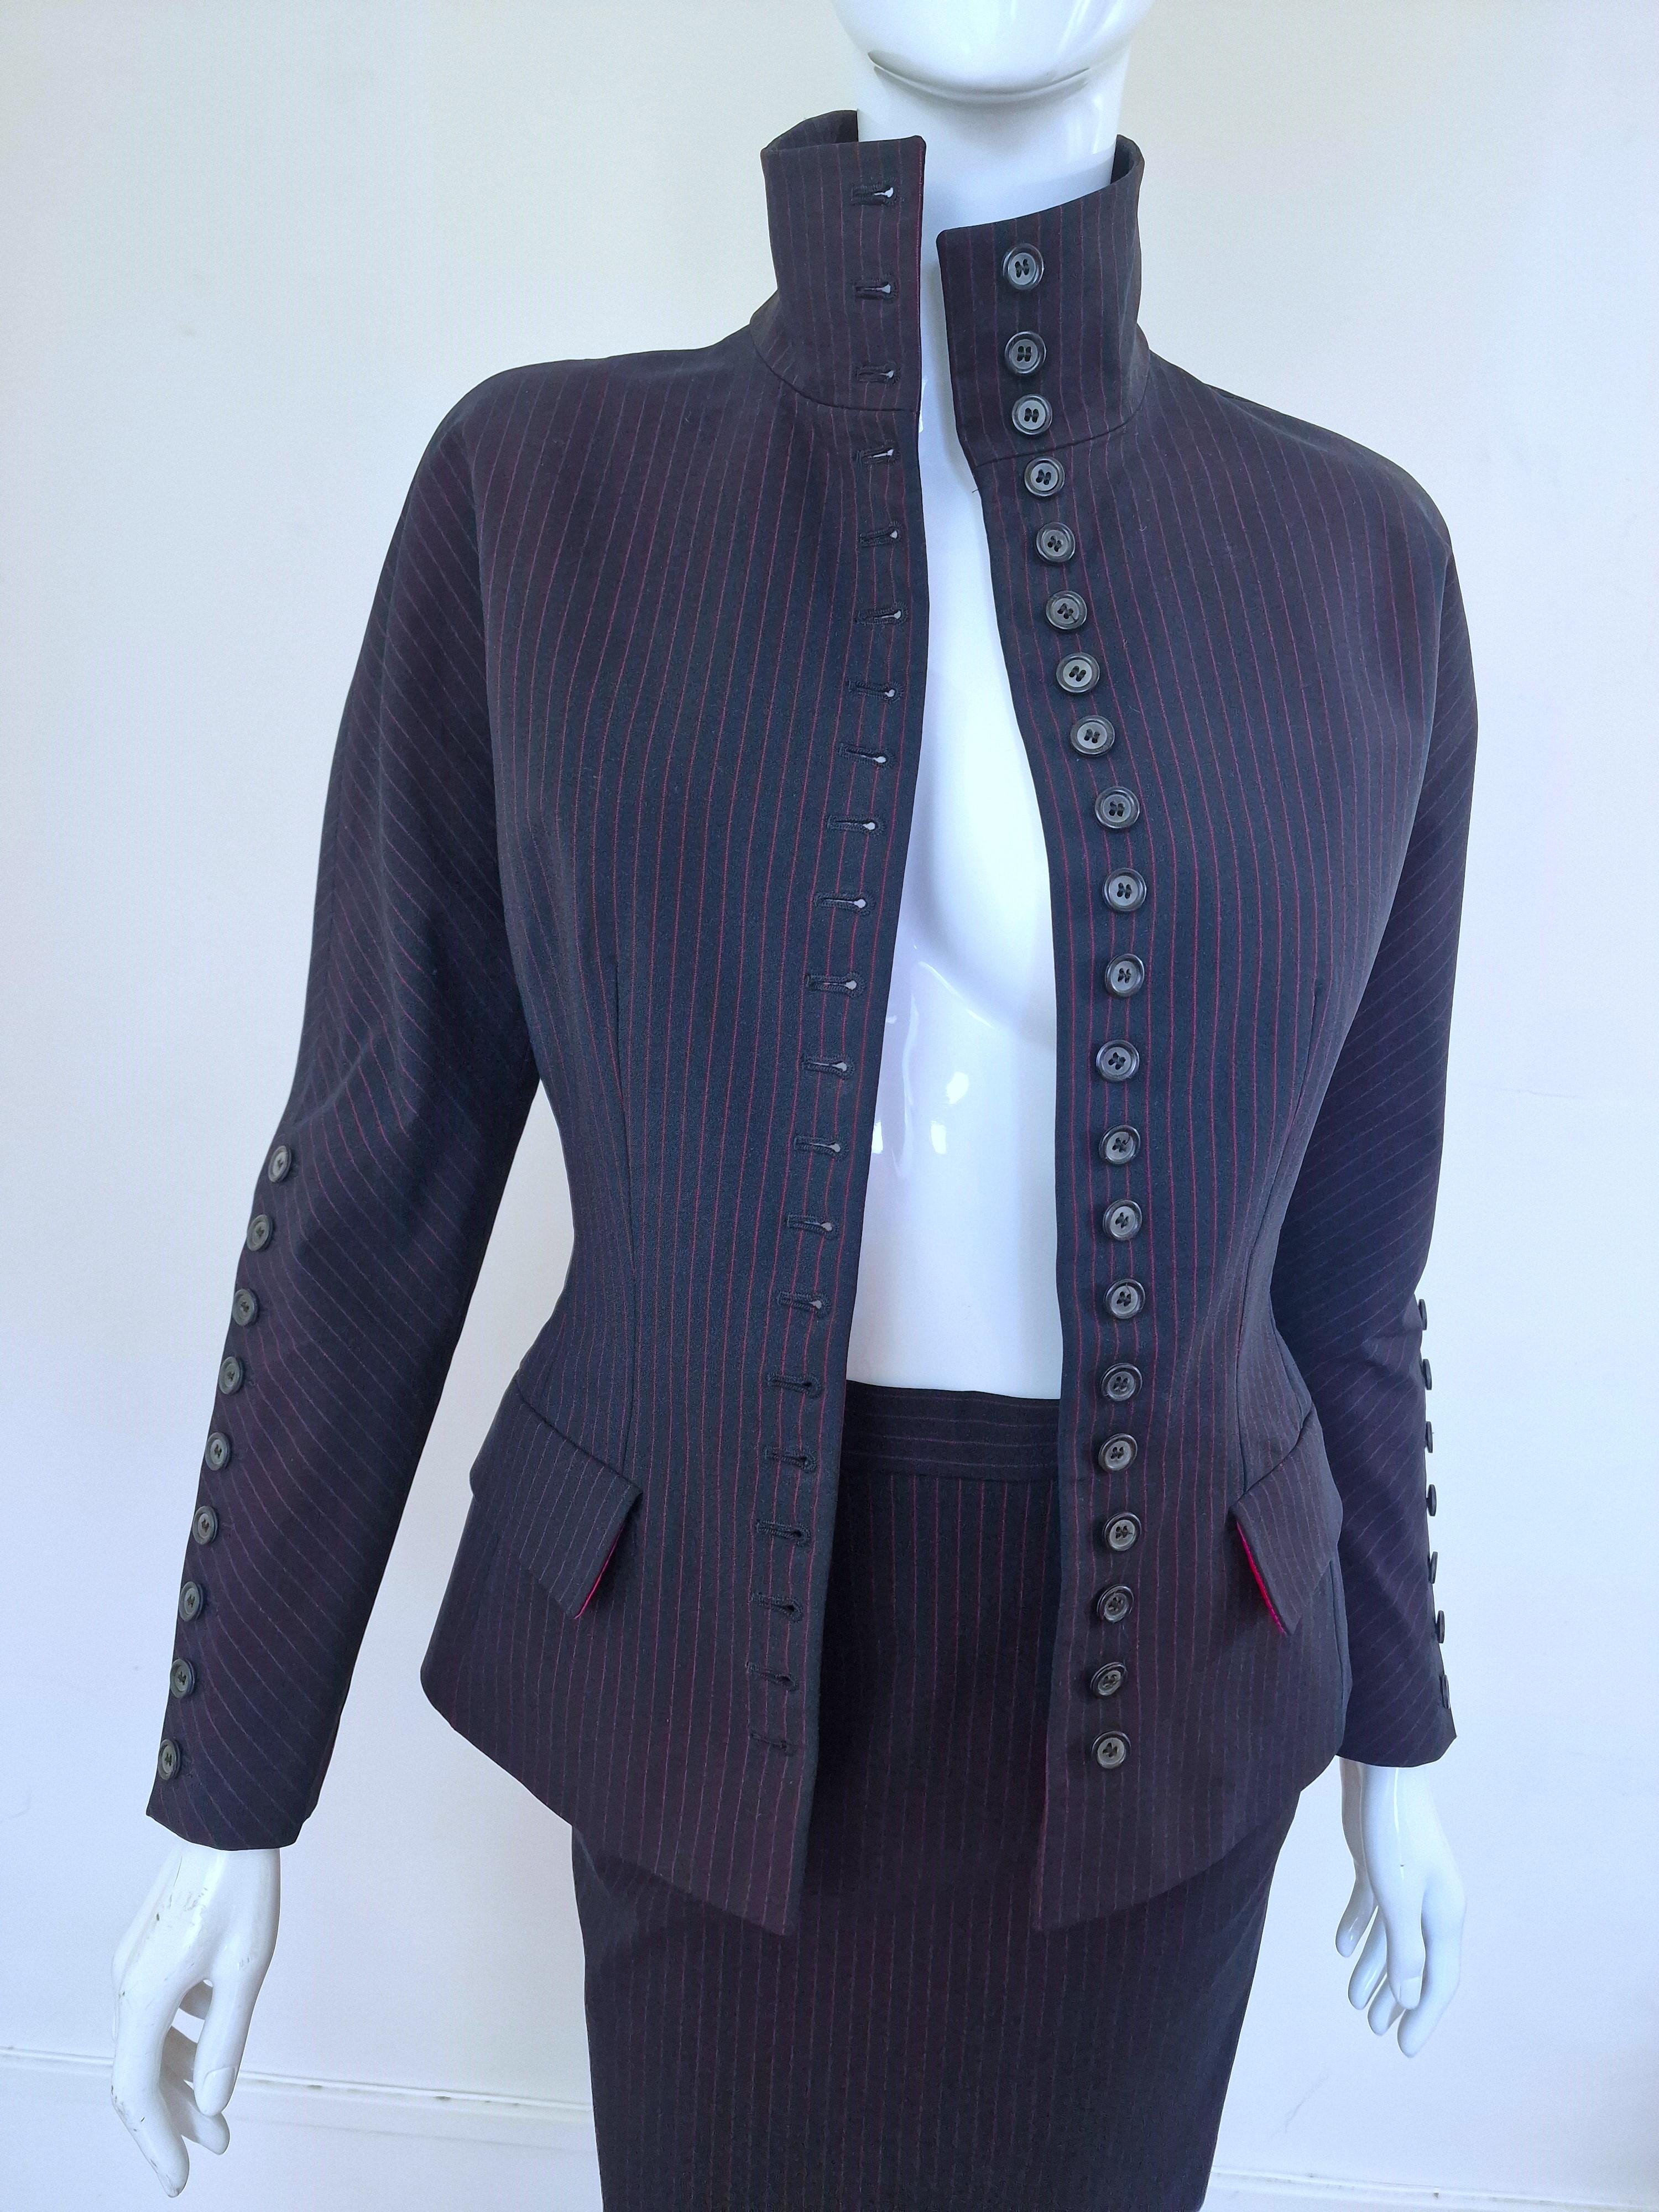 Early Alexander McQueen Joan of Arc Cape 1998 AW98 Runway Collar Dress Suit  For Sale 15